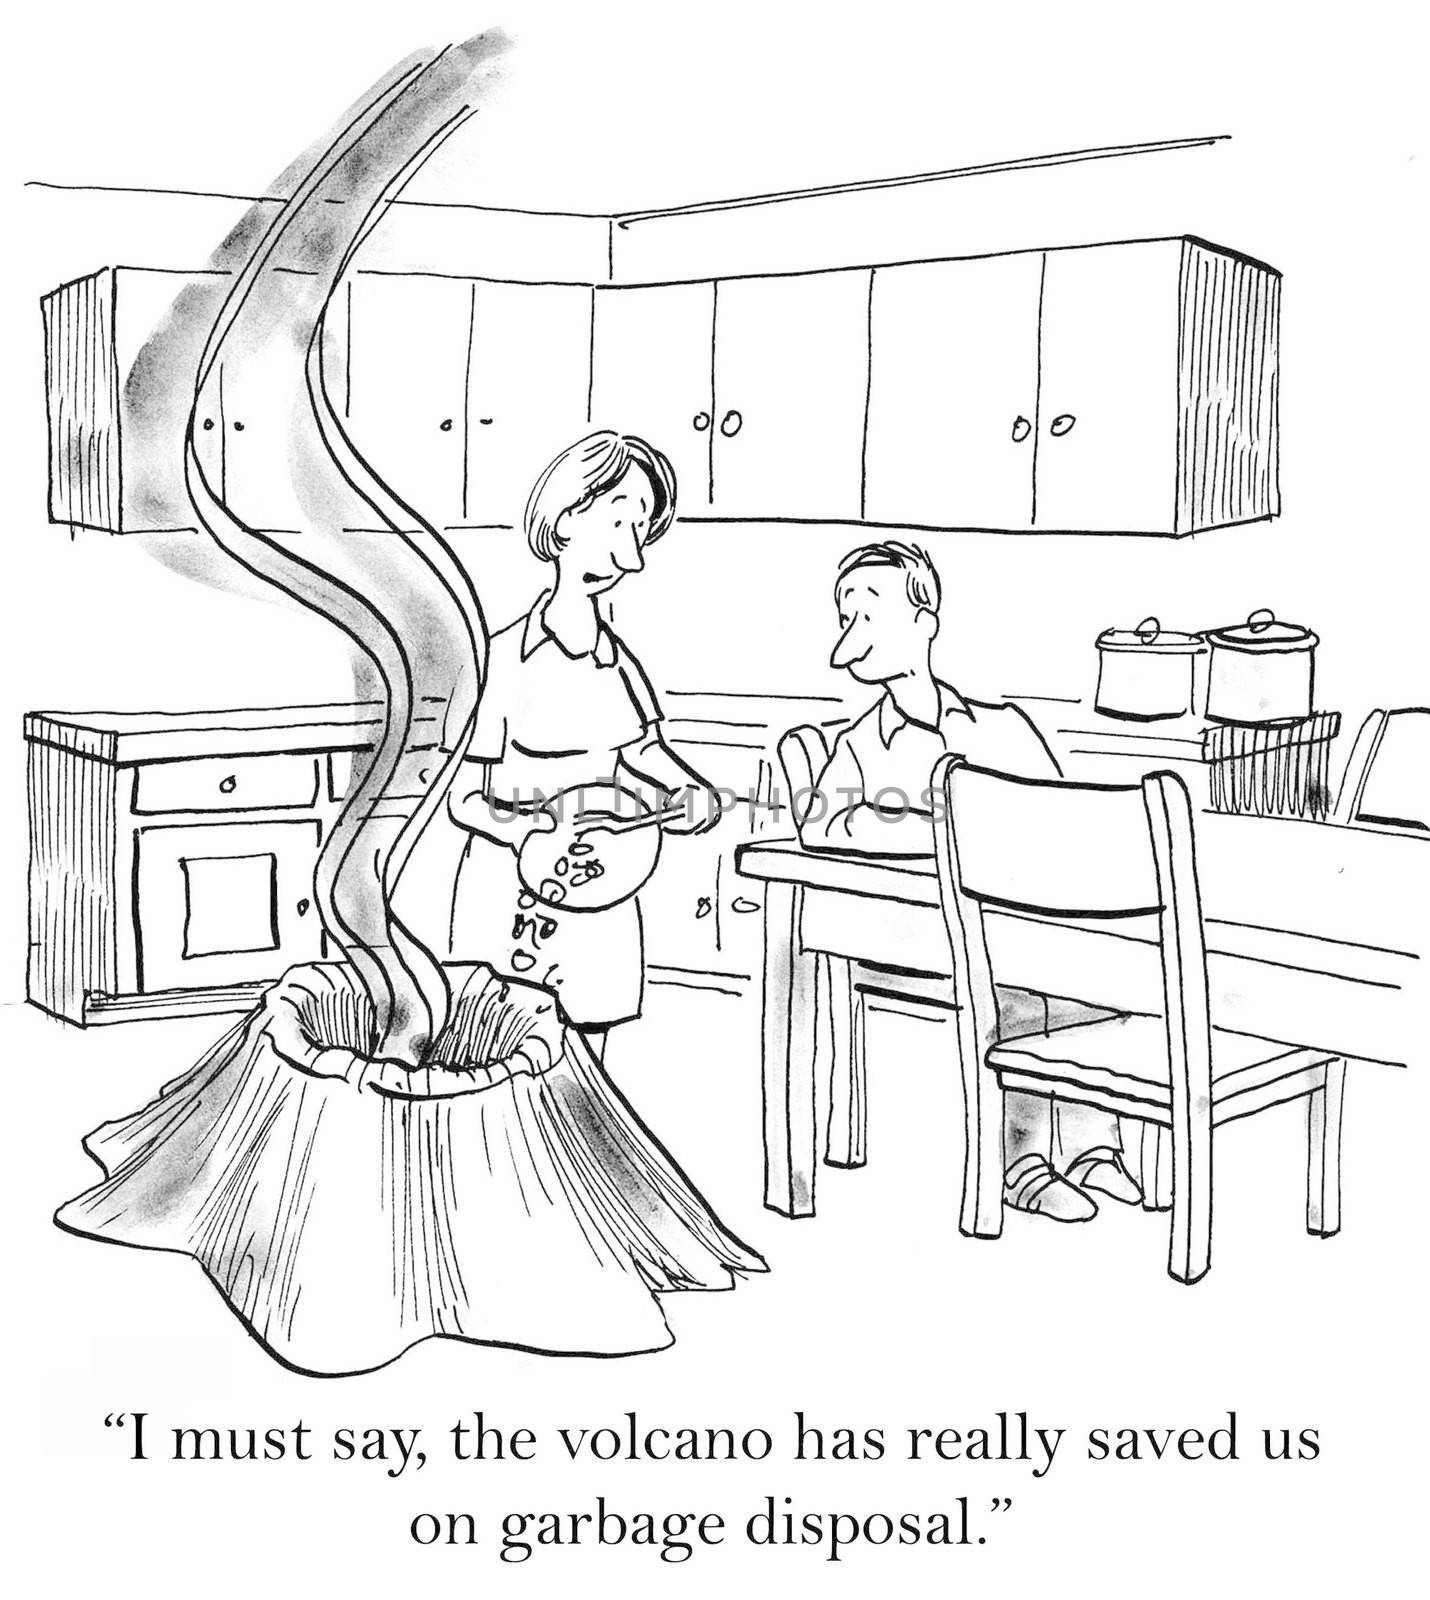 "I must say, the volcano has really saved us on garbage disposal."